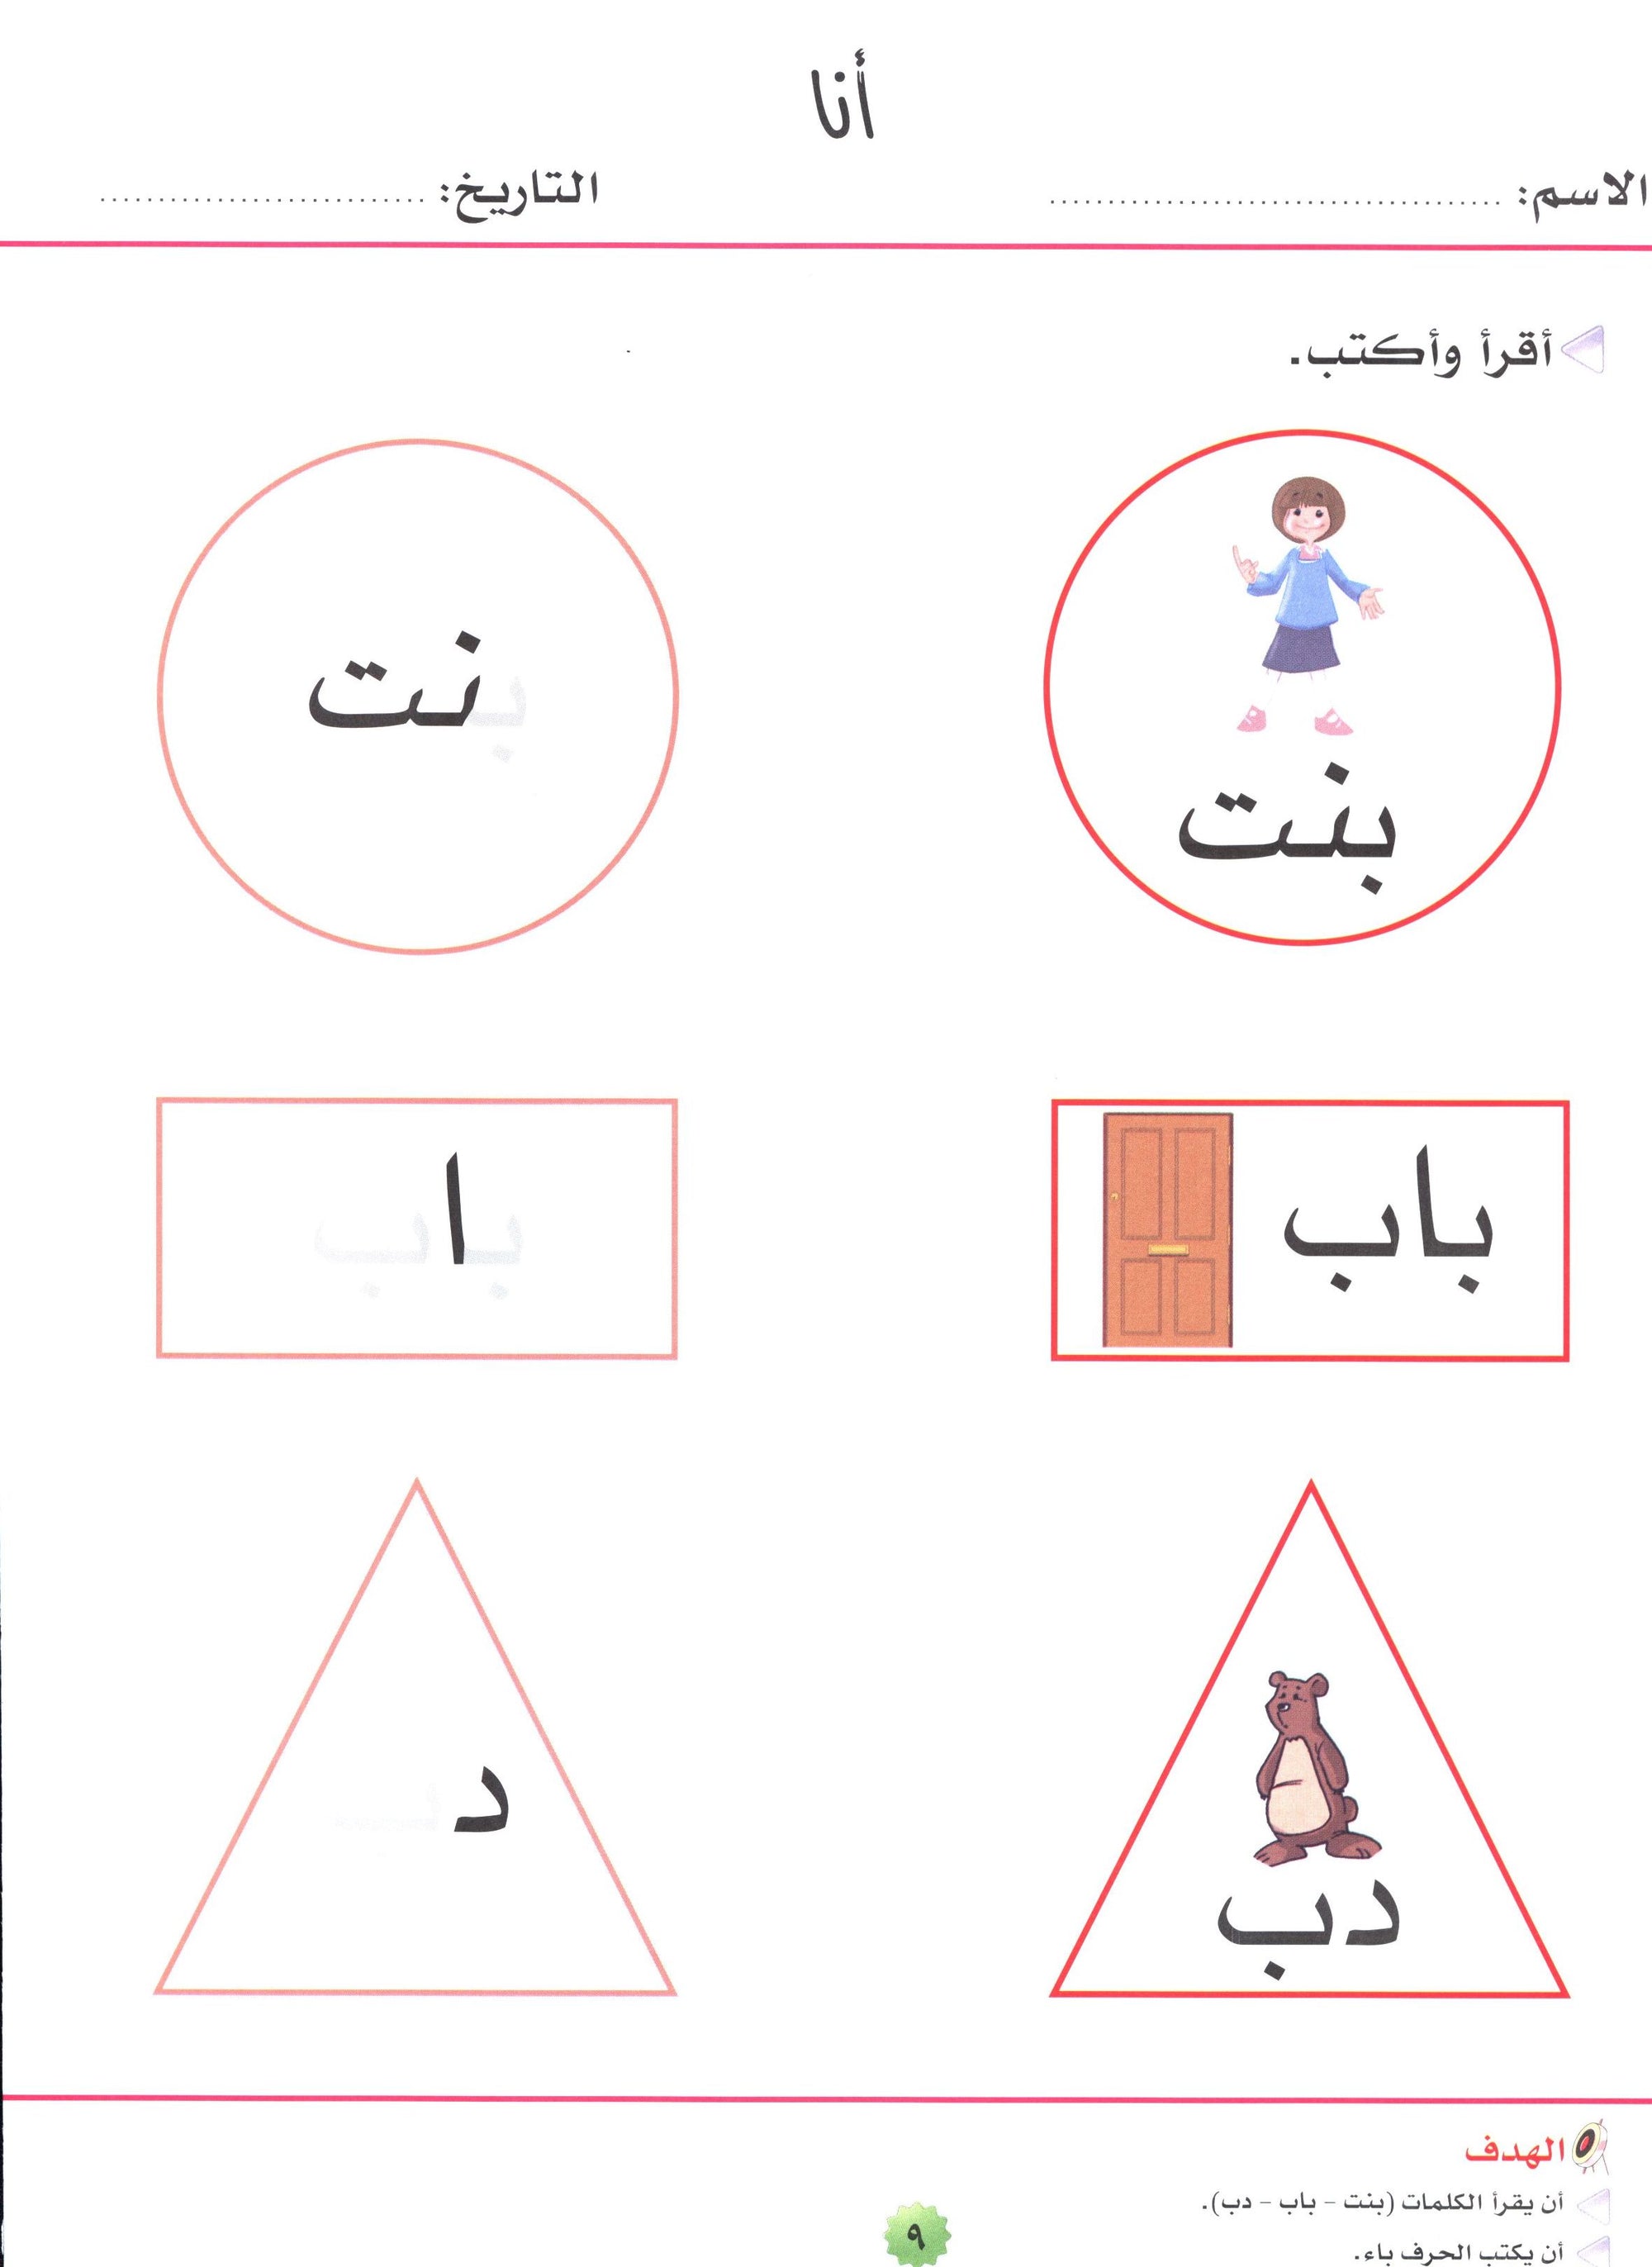 My Skills and Knowledge Worksheets Volume 1 مجموعة معلوماتي و مهاراتي